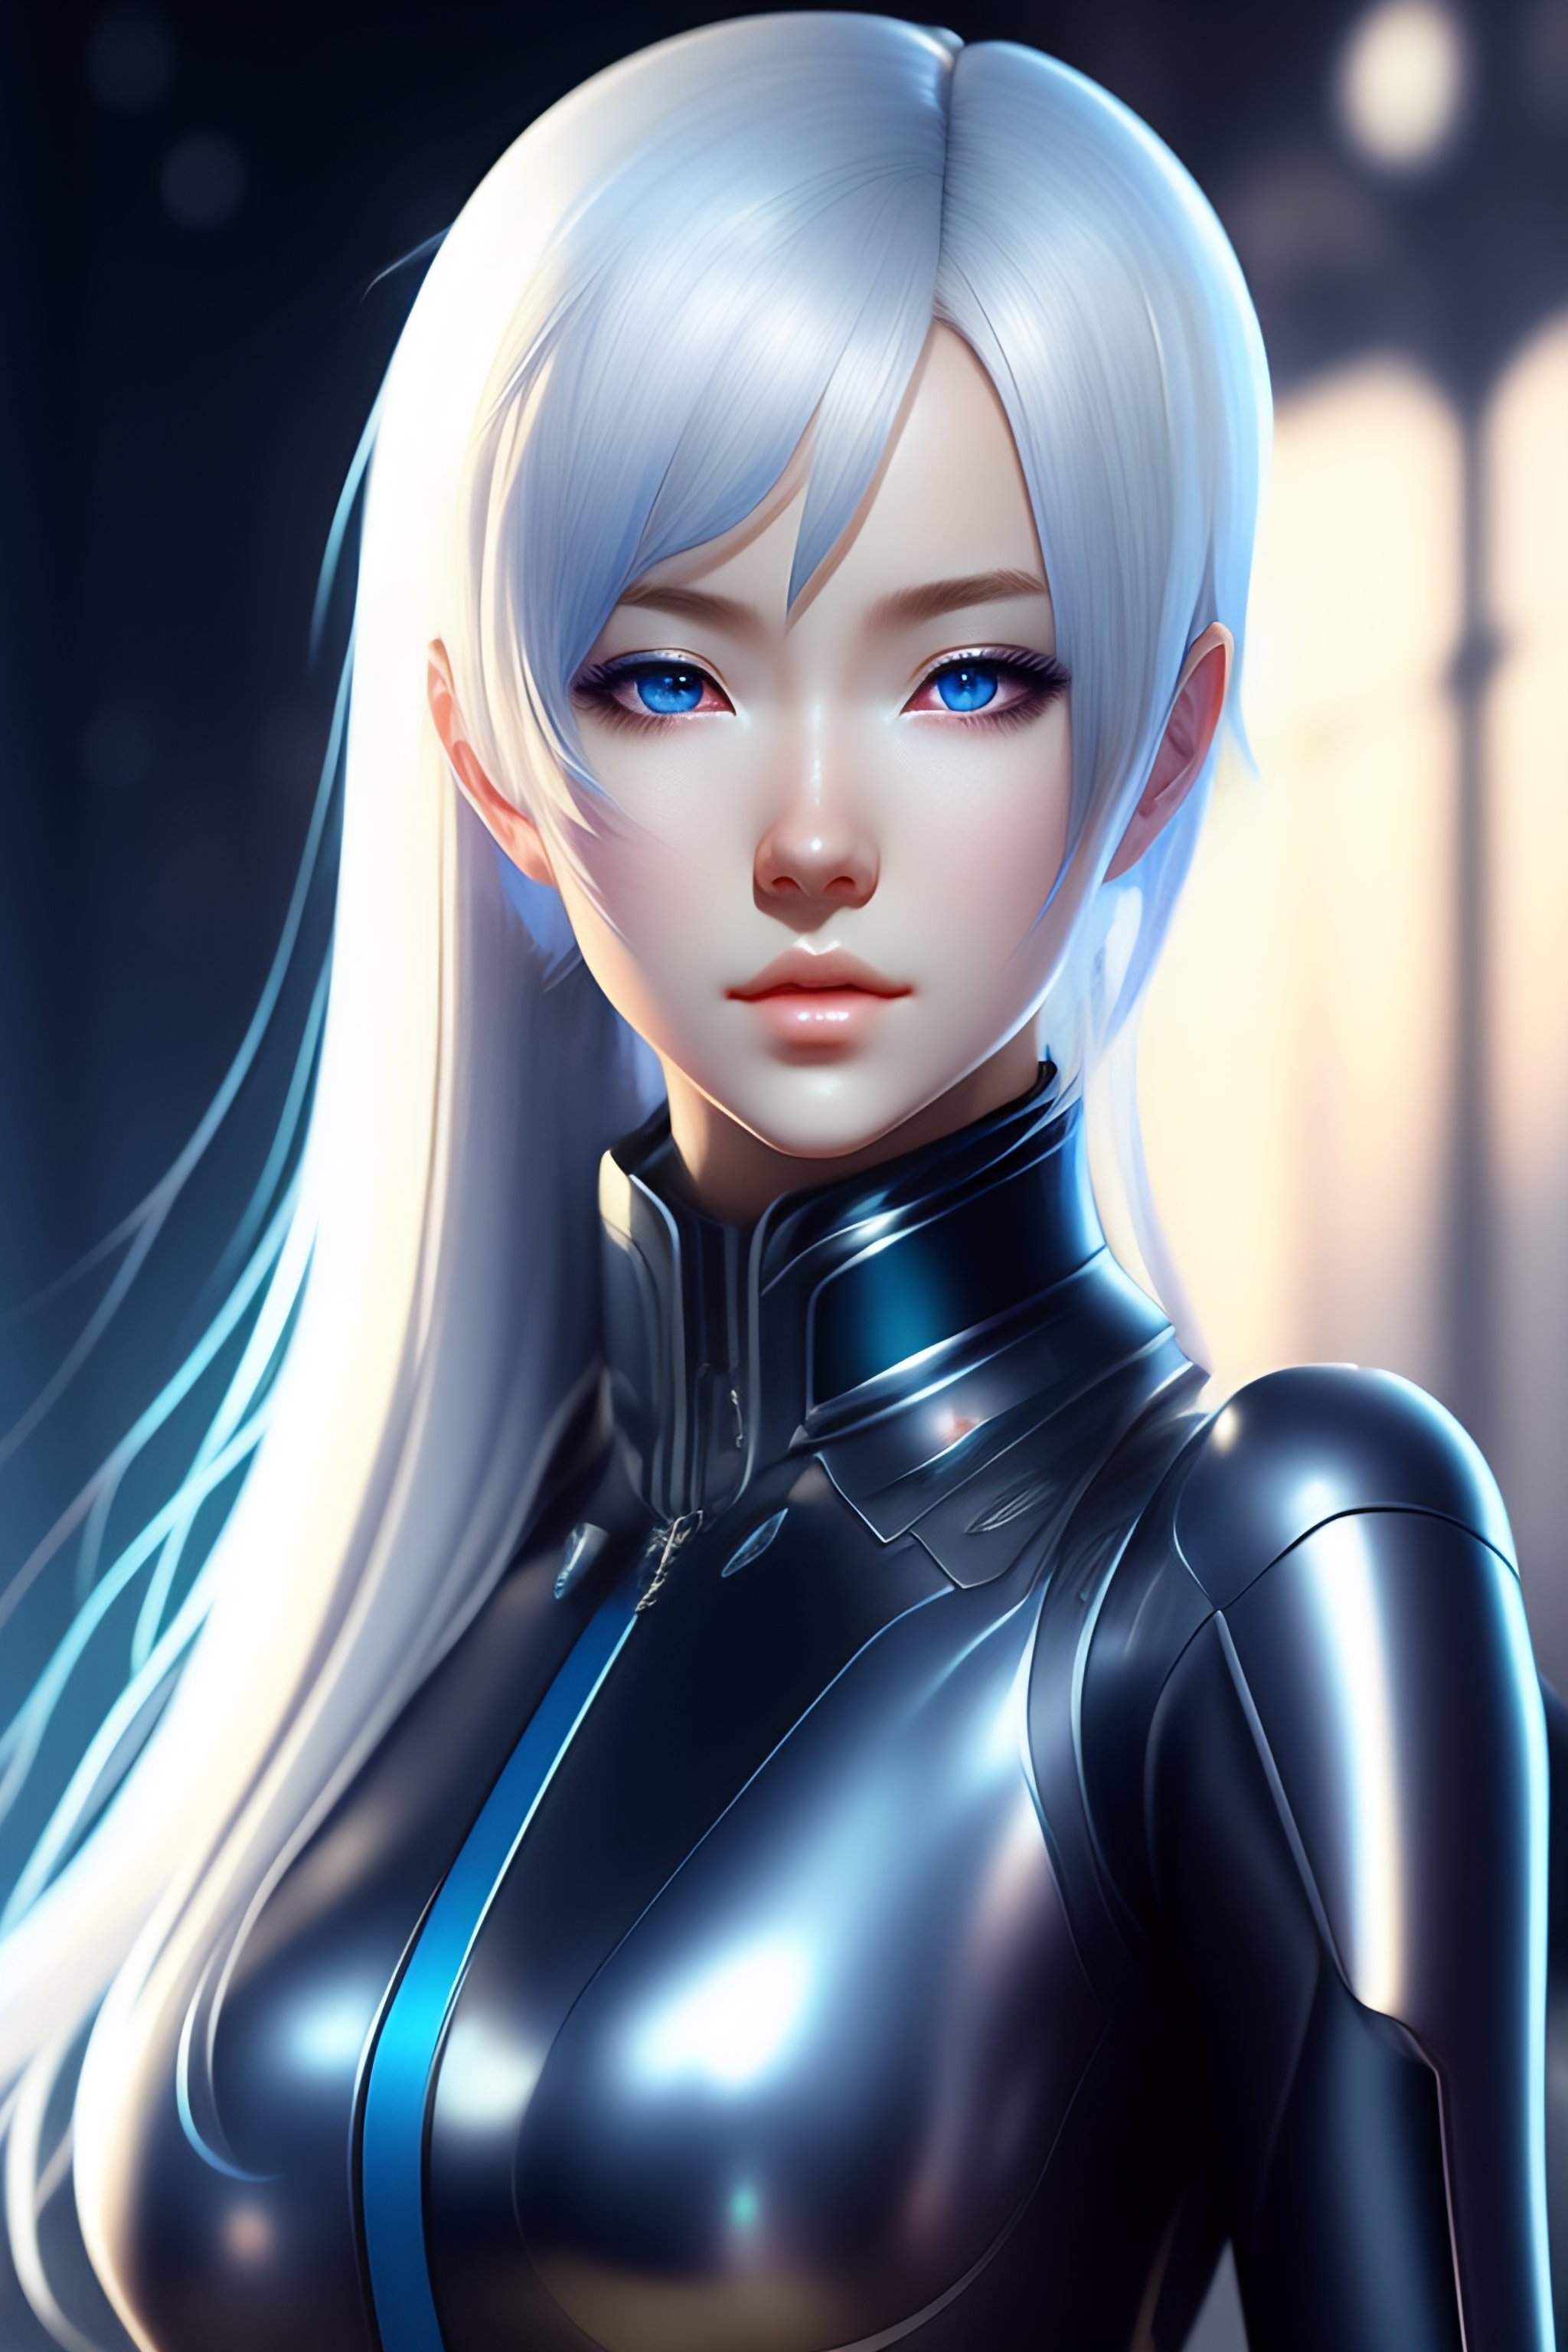 Lexica - Young adult anime android girl with silver hair, blue eyes ...